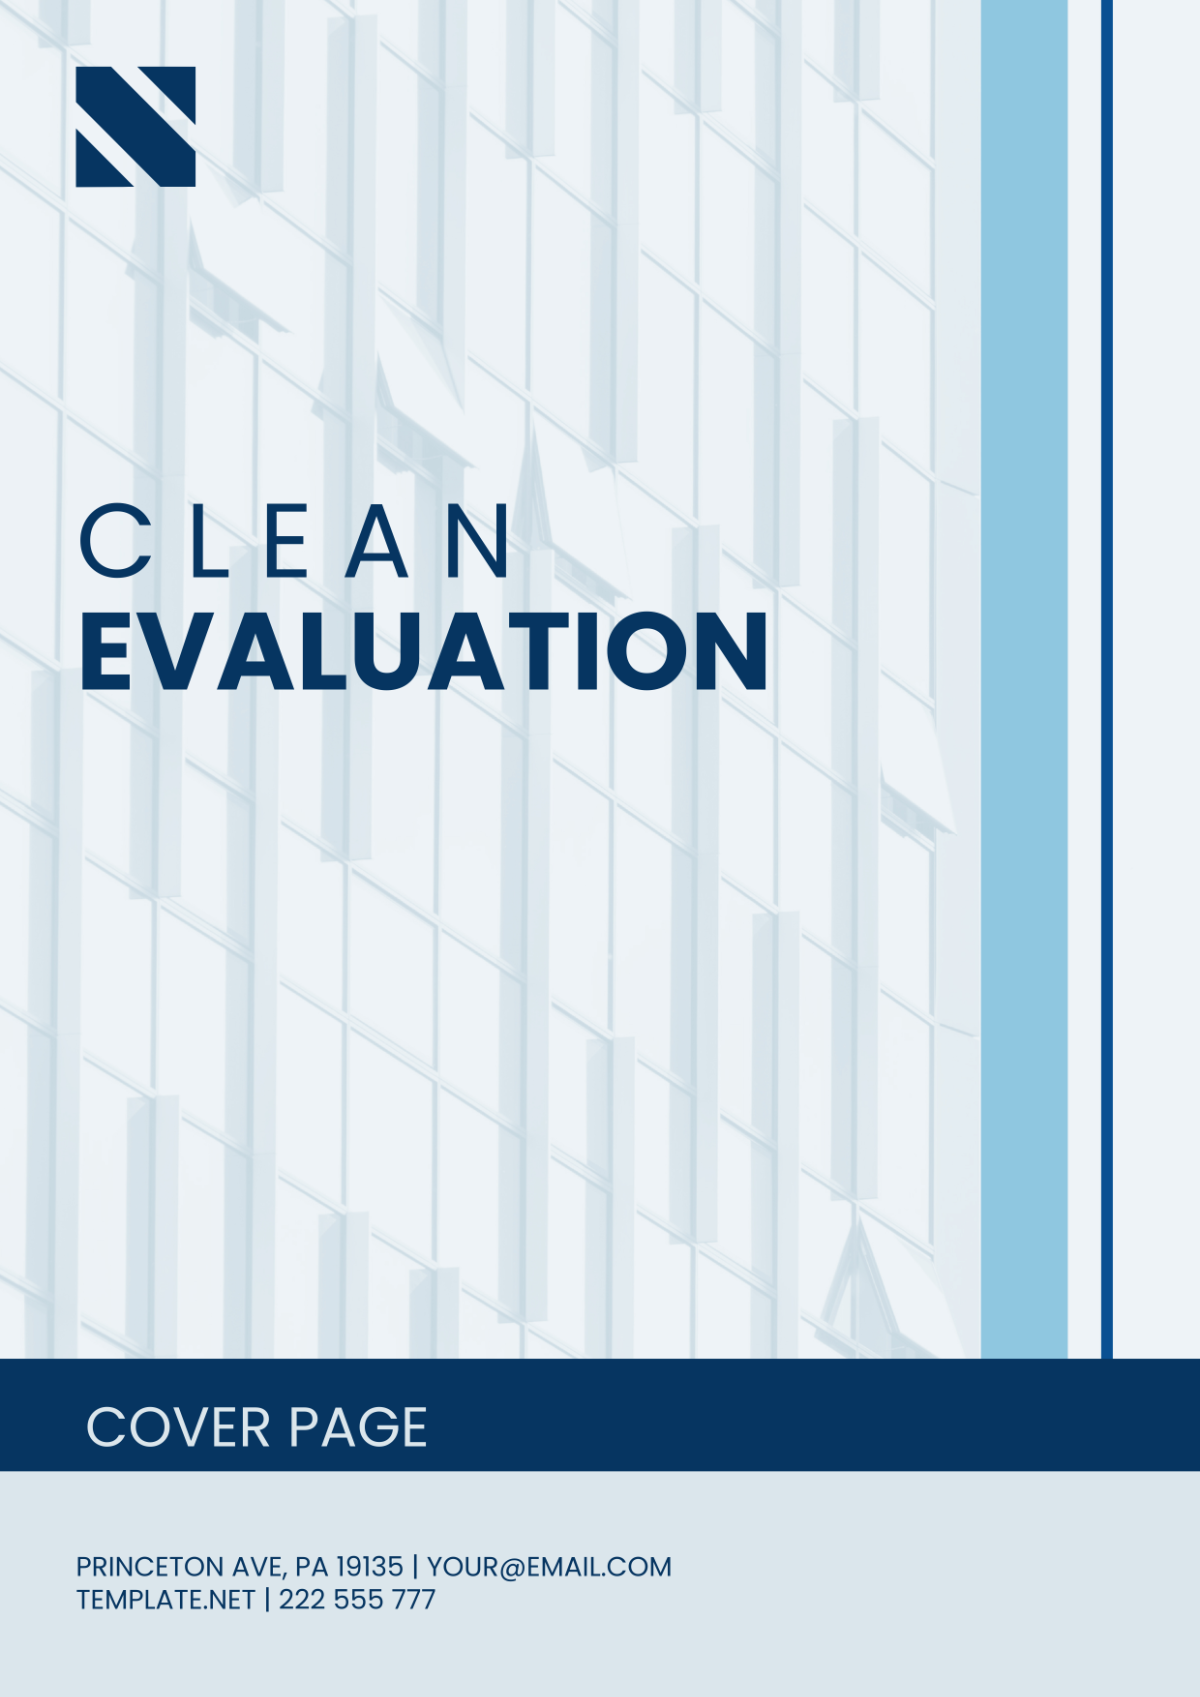 Clean Evaluation Cover Page Template